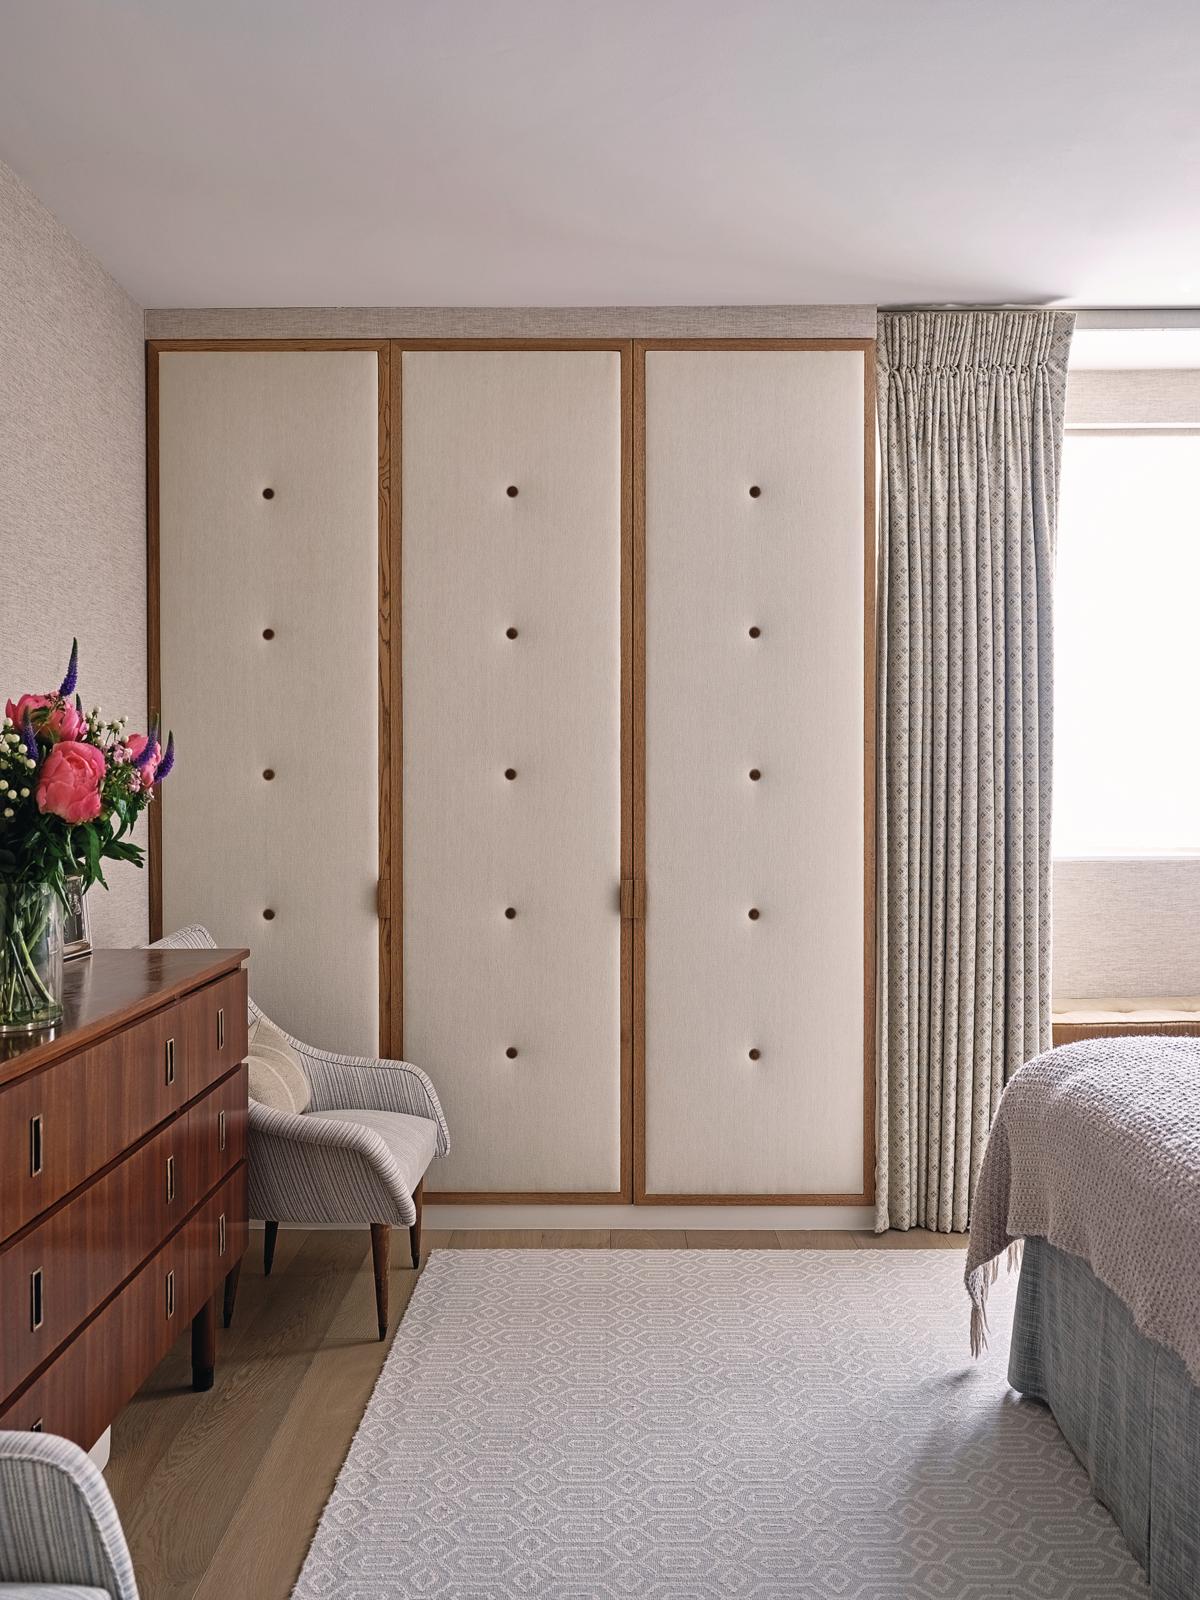 built in wardrobes with padded upholstered doors